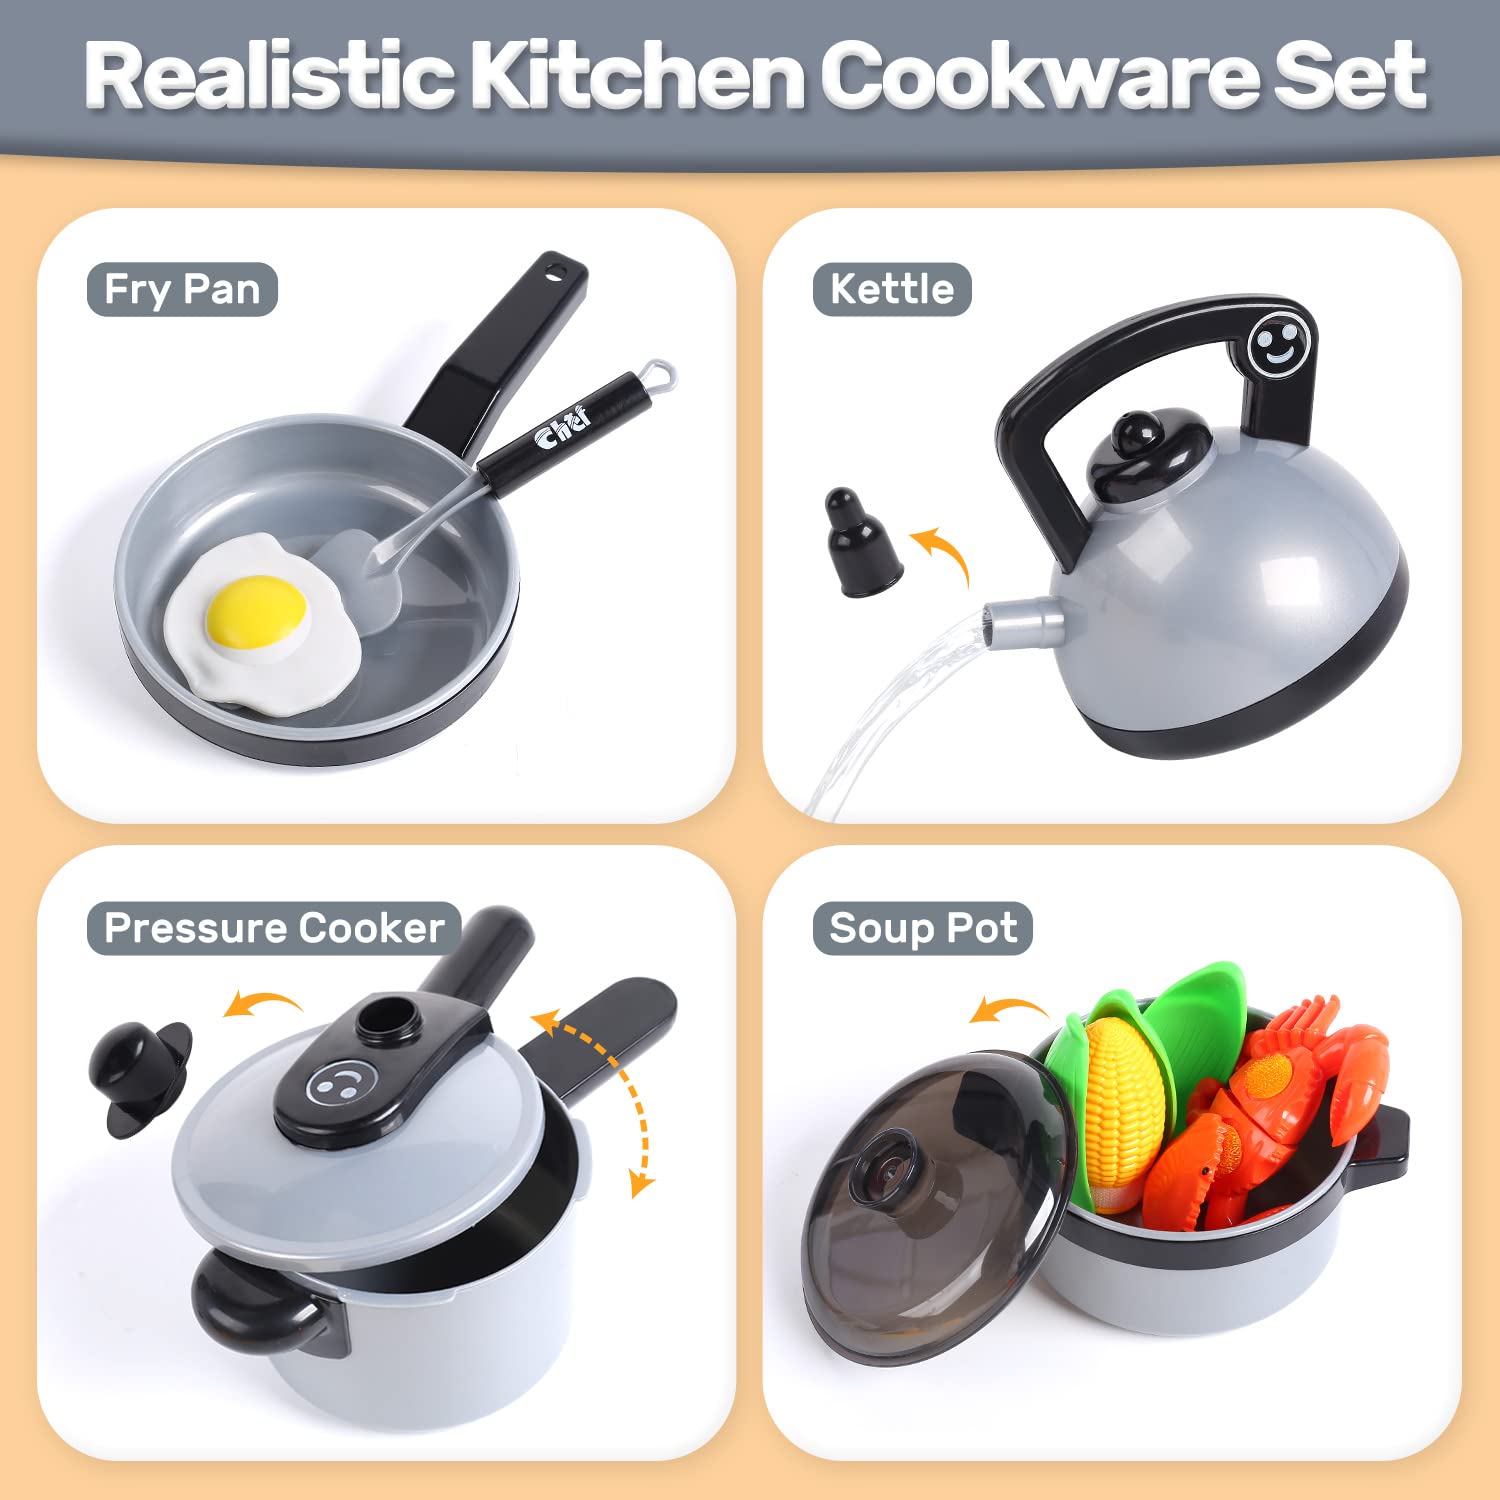 New Arrival 40Pcs Stainless Steel Cookware Set Cooking Pan Set